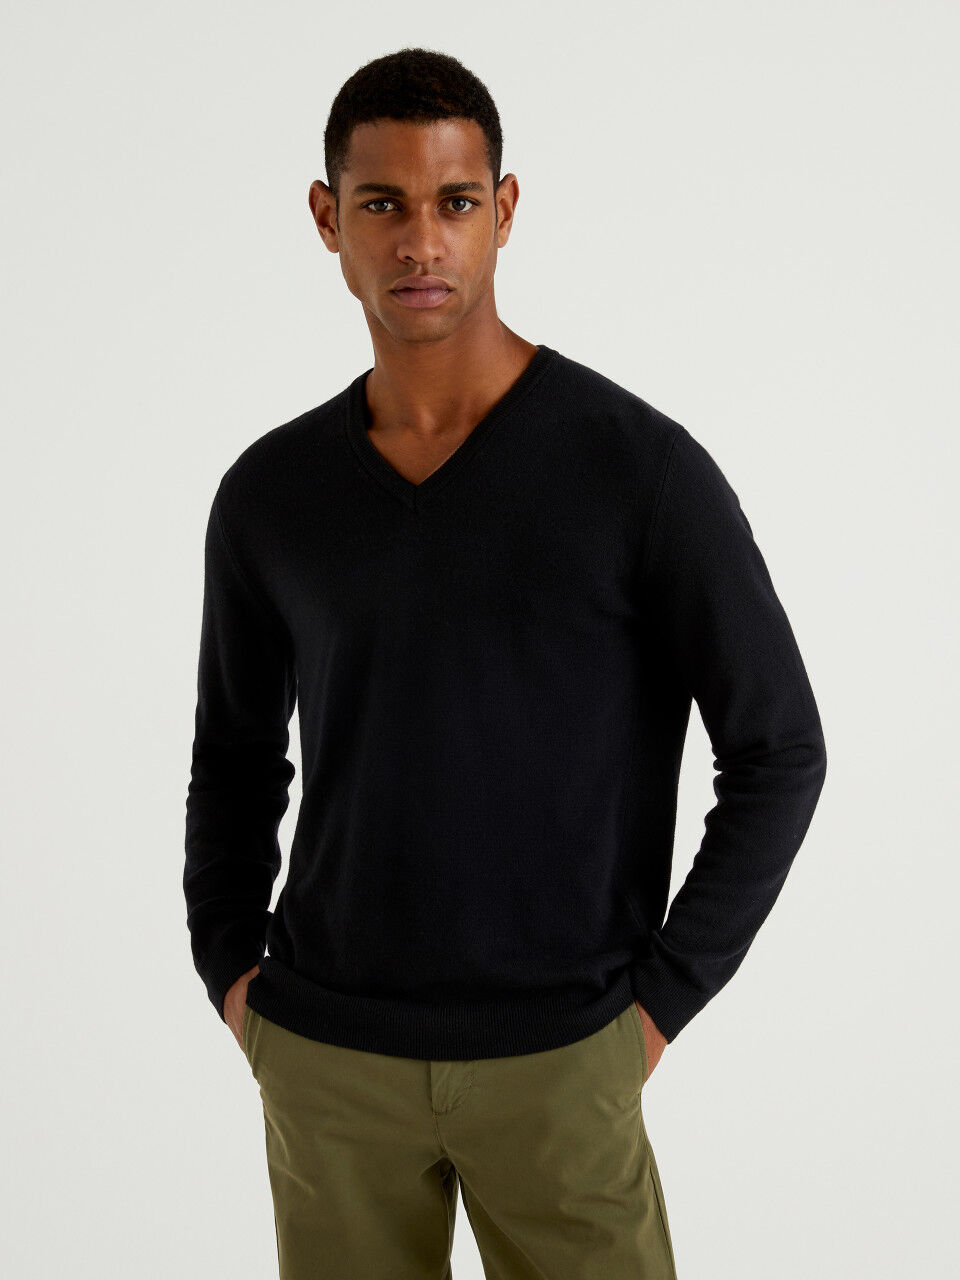 Men's V-Neck Sweaters New Collection 2022 | Benetton